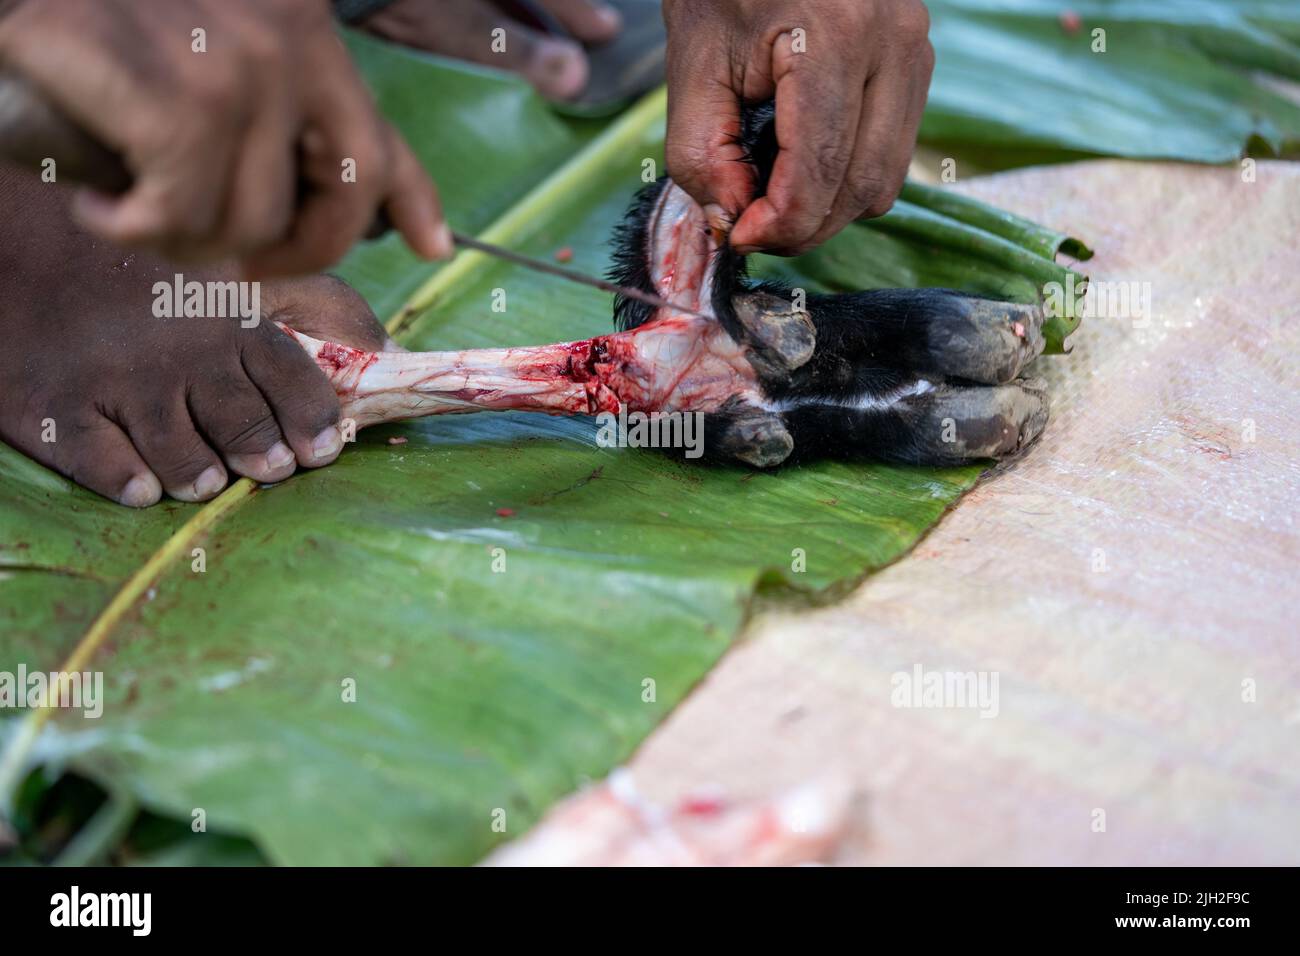 a person is removing the skin of a goat's leg Stock Photo